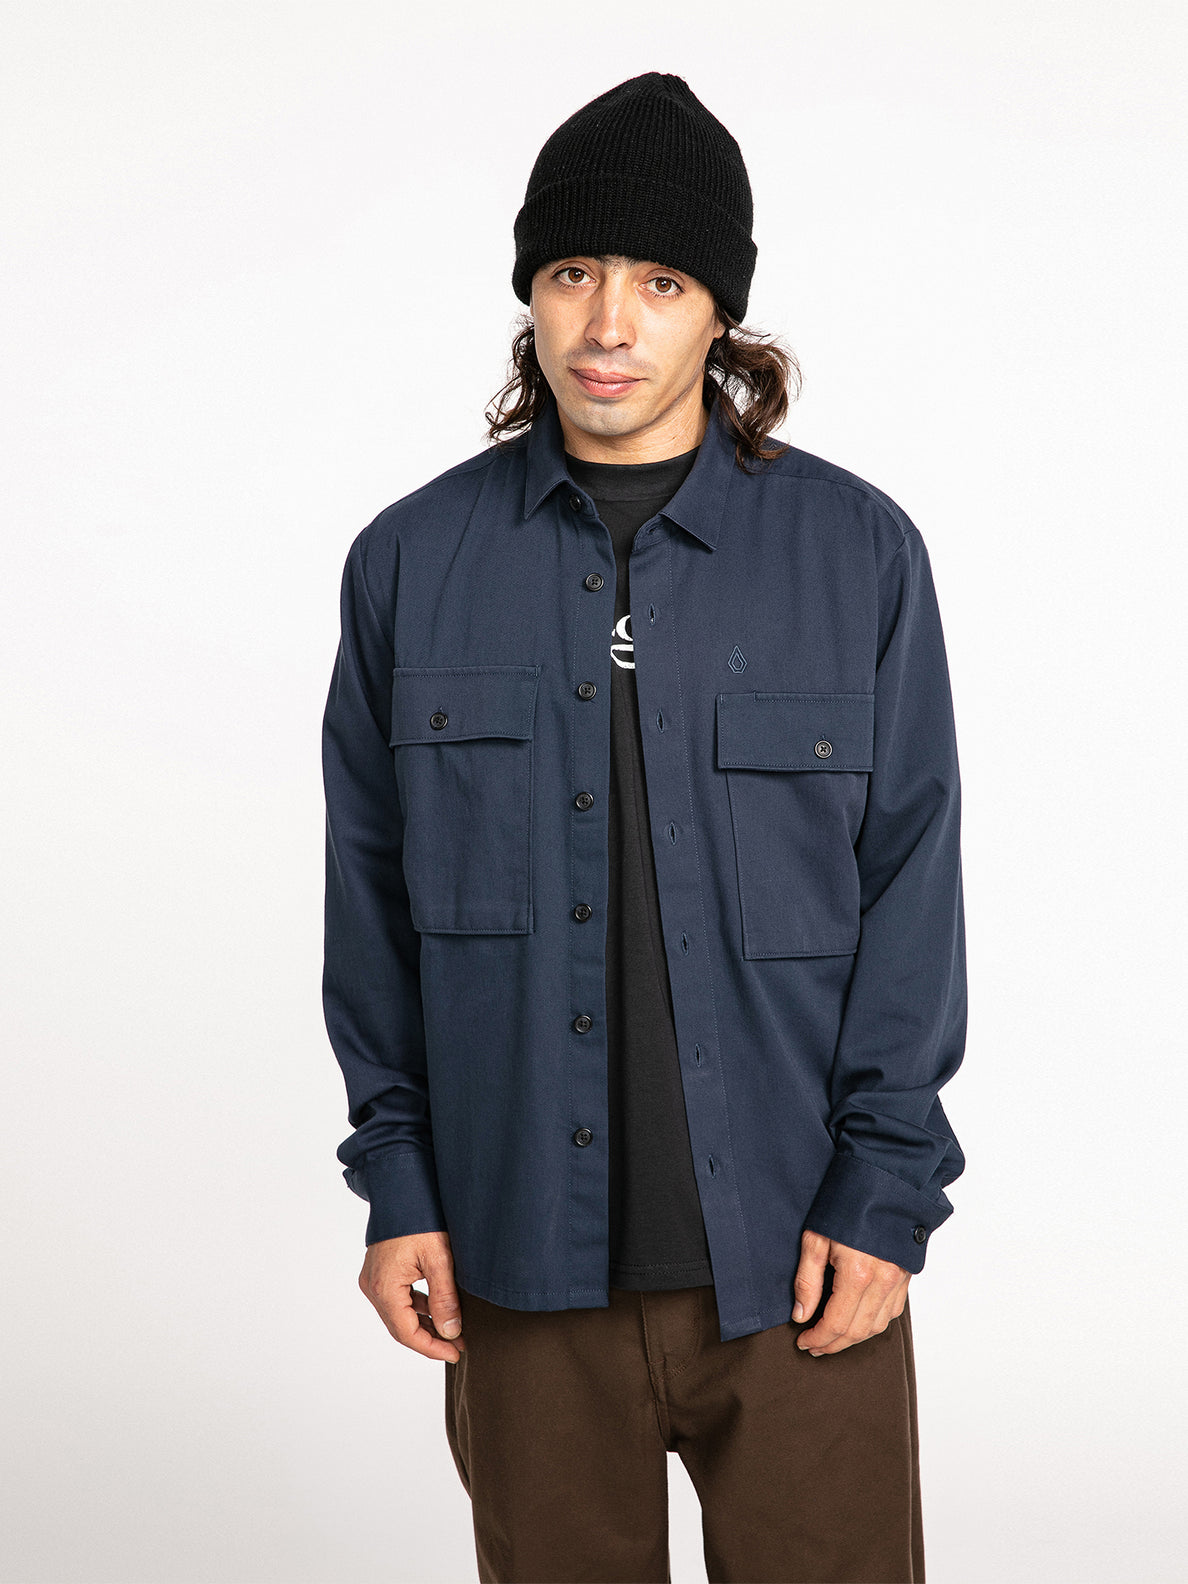 Louie Lopez Long Sleeve Work Shirt - Navy (A0532205_NVY) [F]